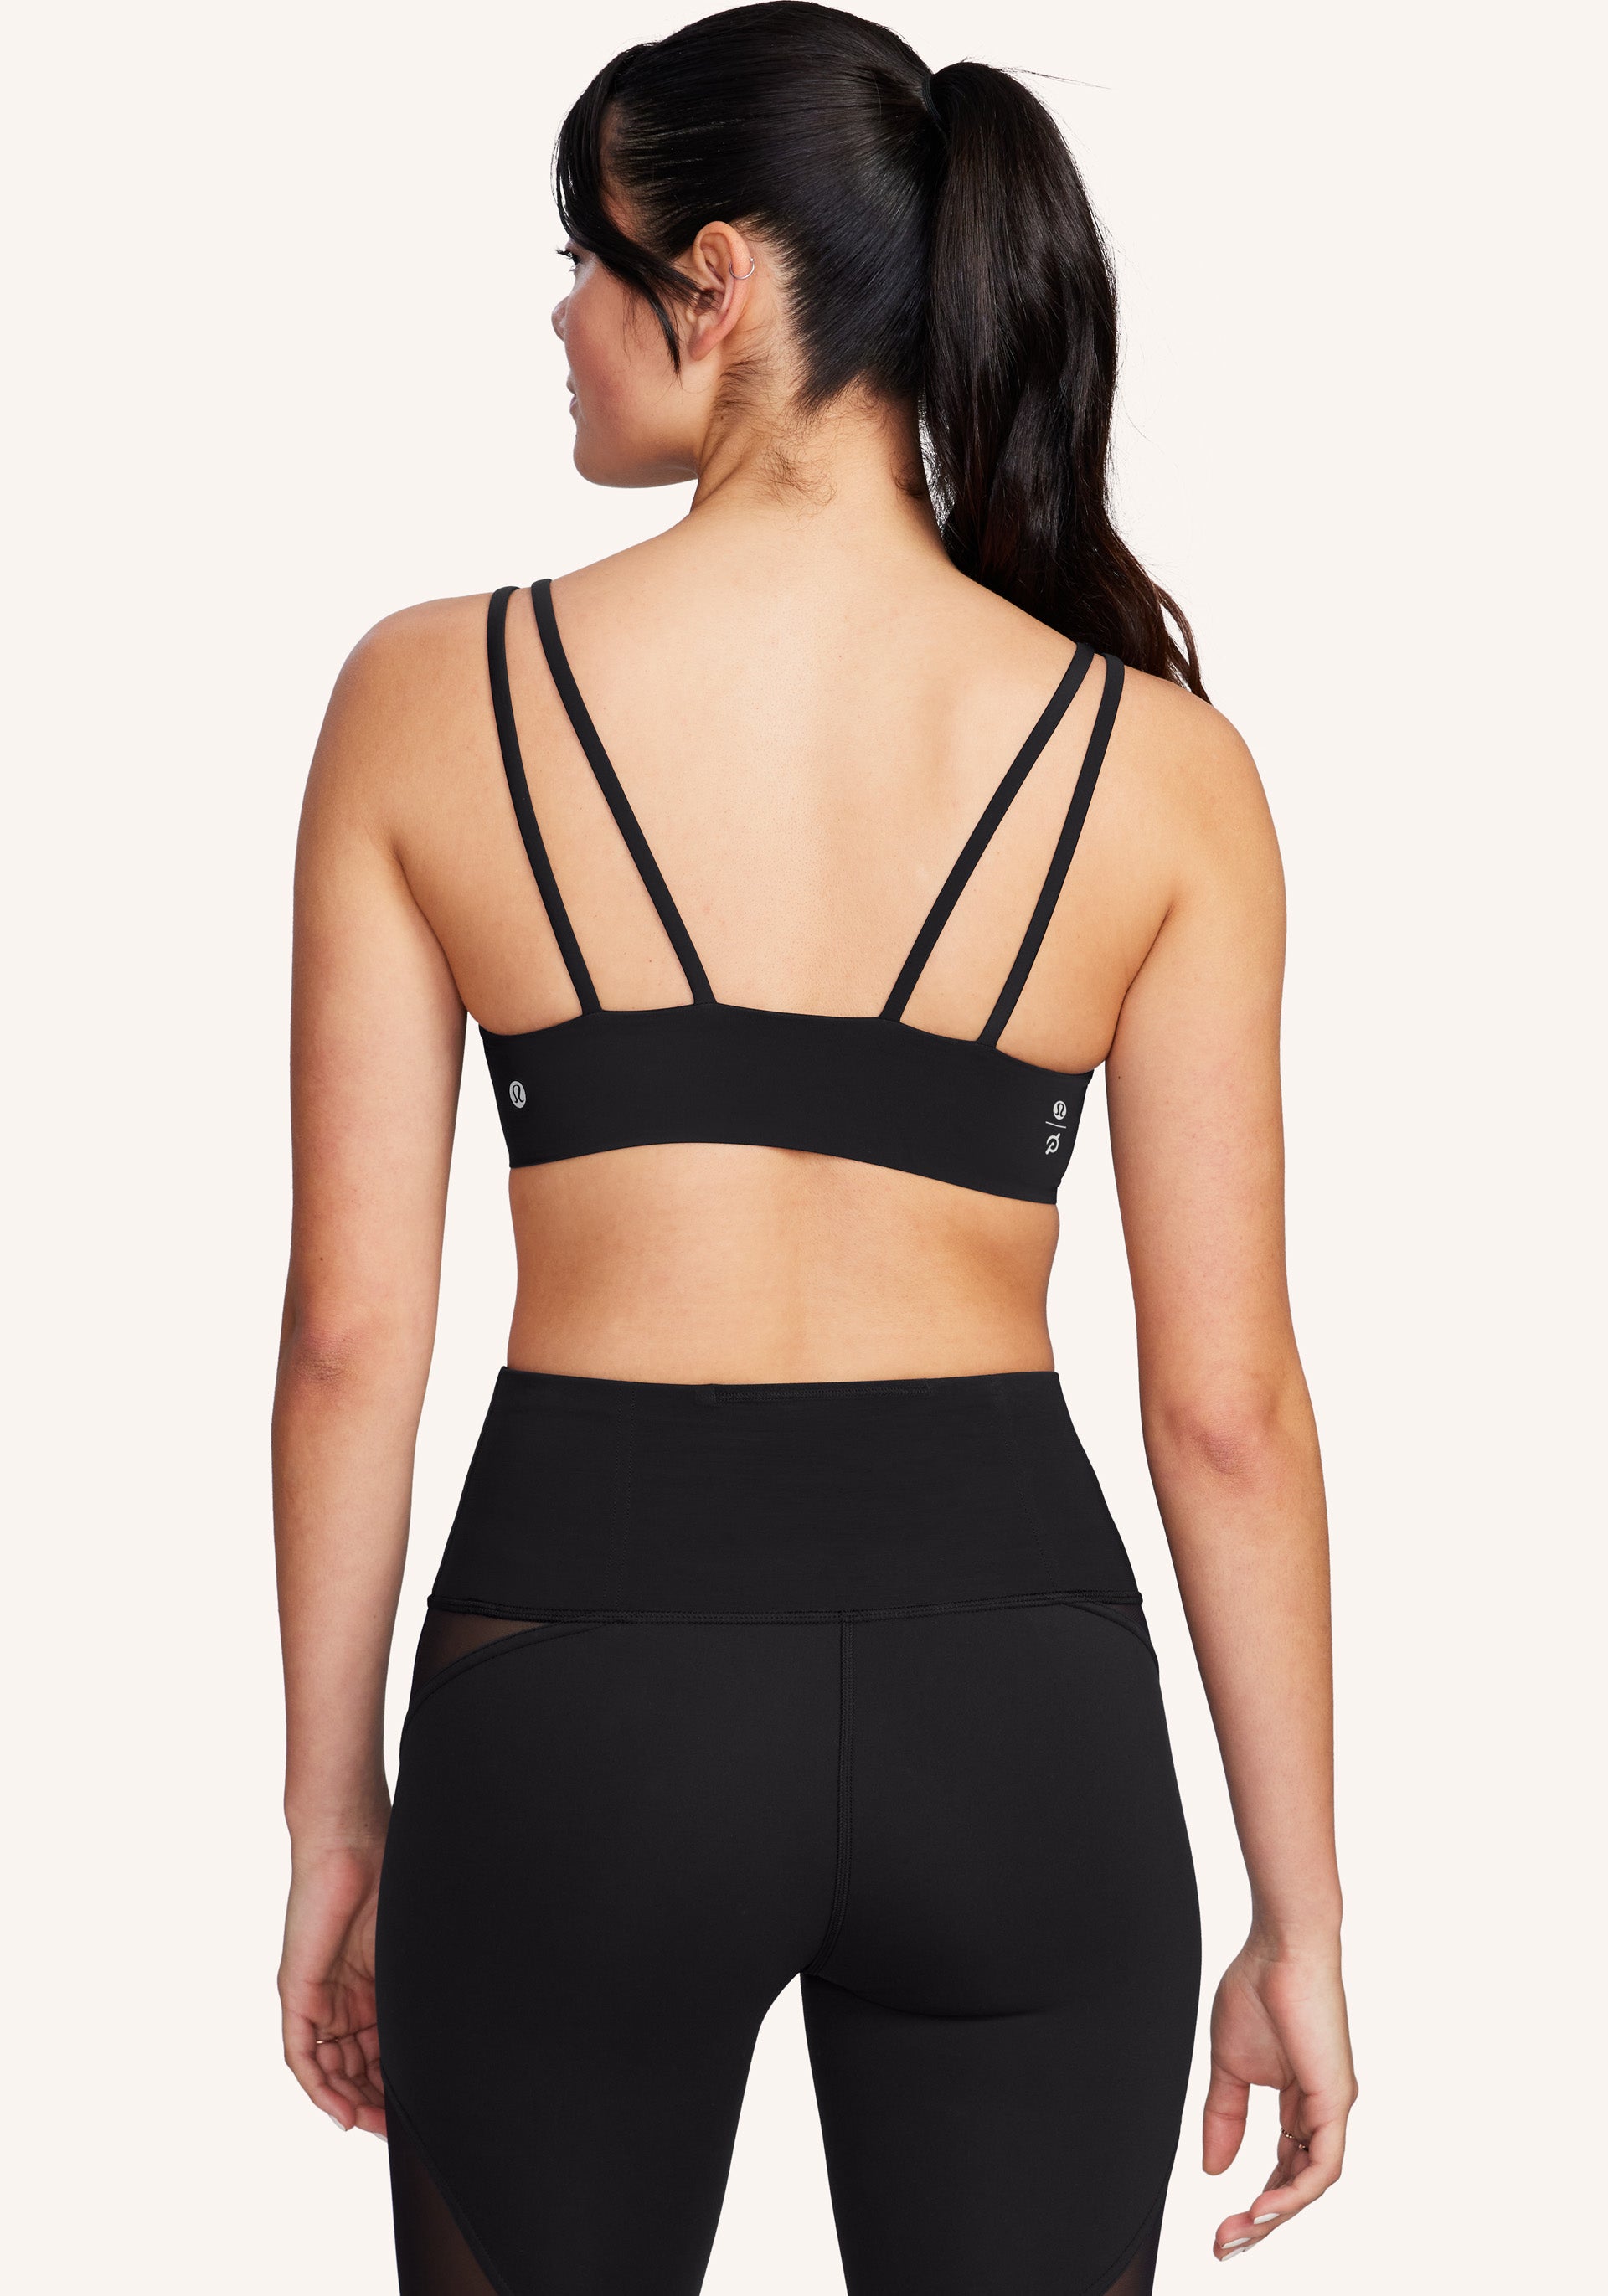 Why you need to check out this new affordable sports bra line - Chatelaine